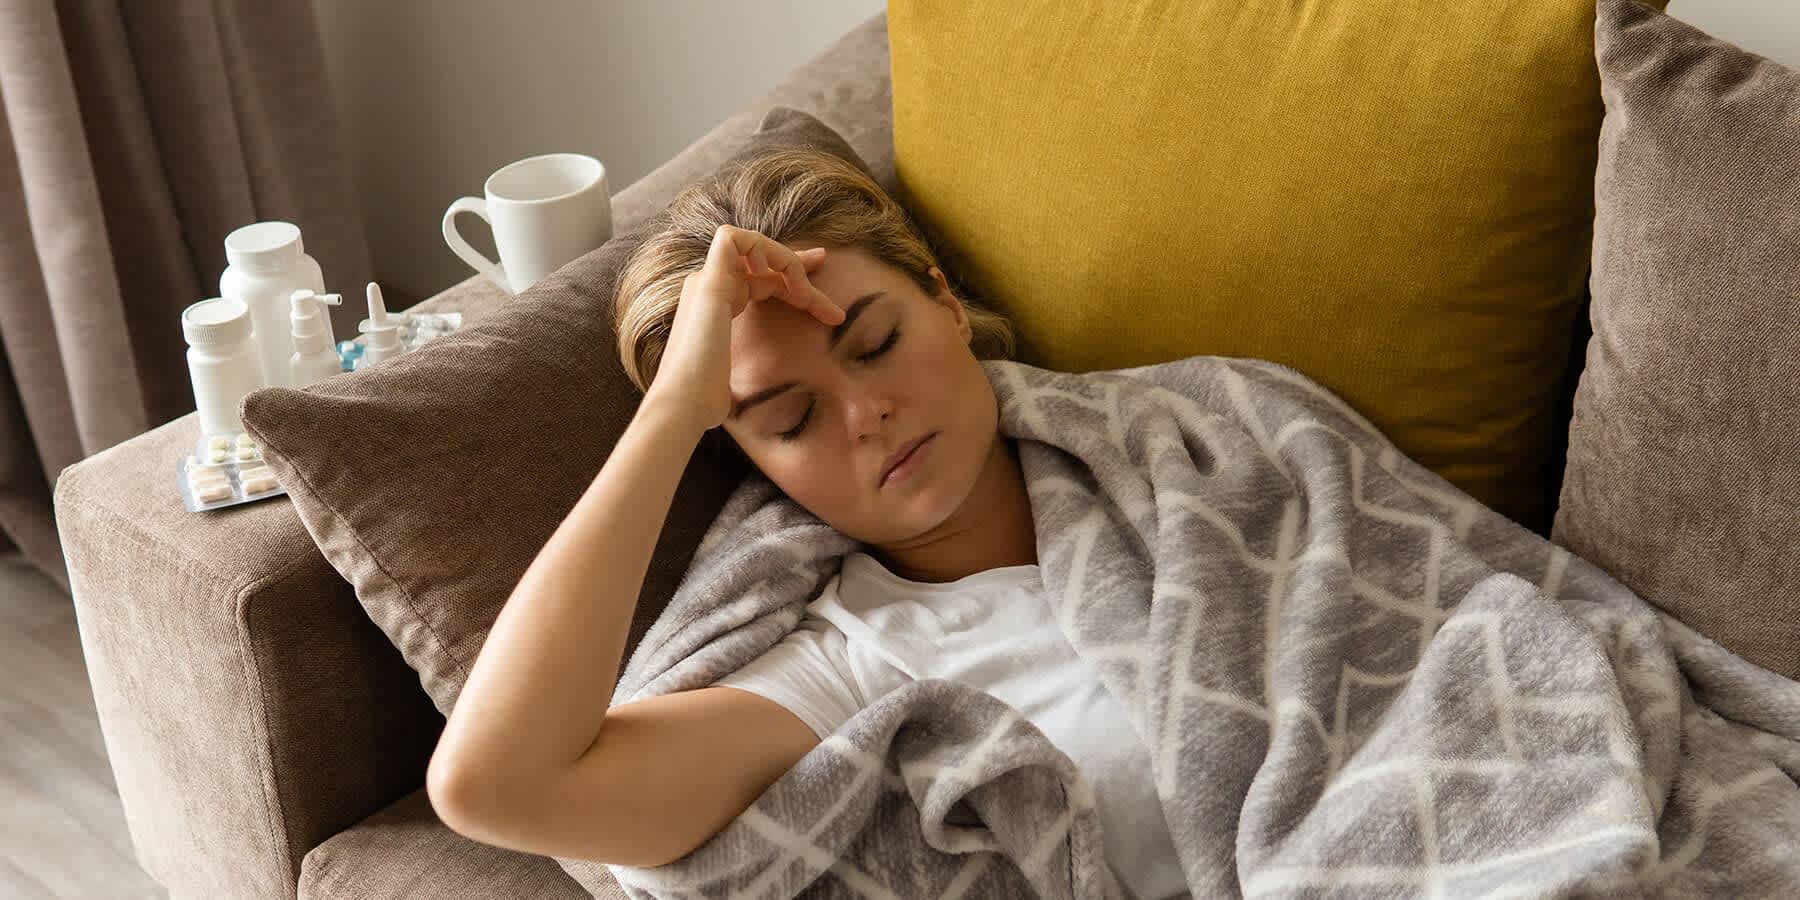 Woman lying on couch with morning sickness and wondering if vitamin B6 helps with nausea